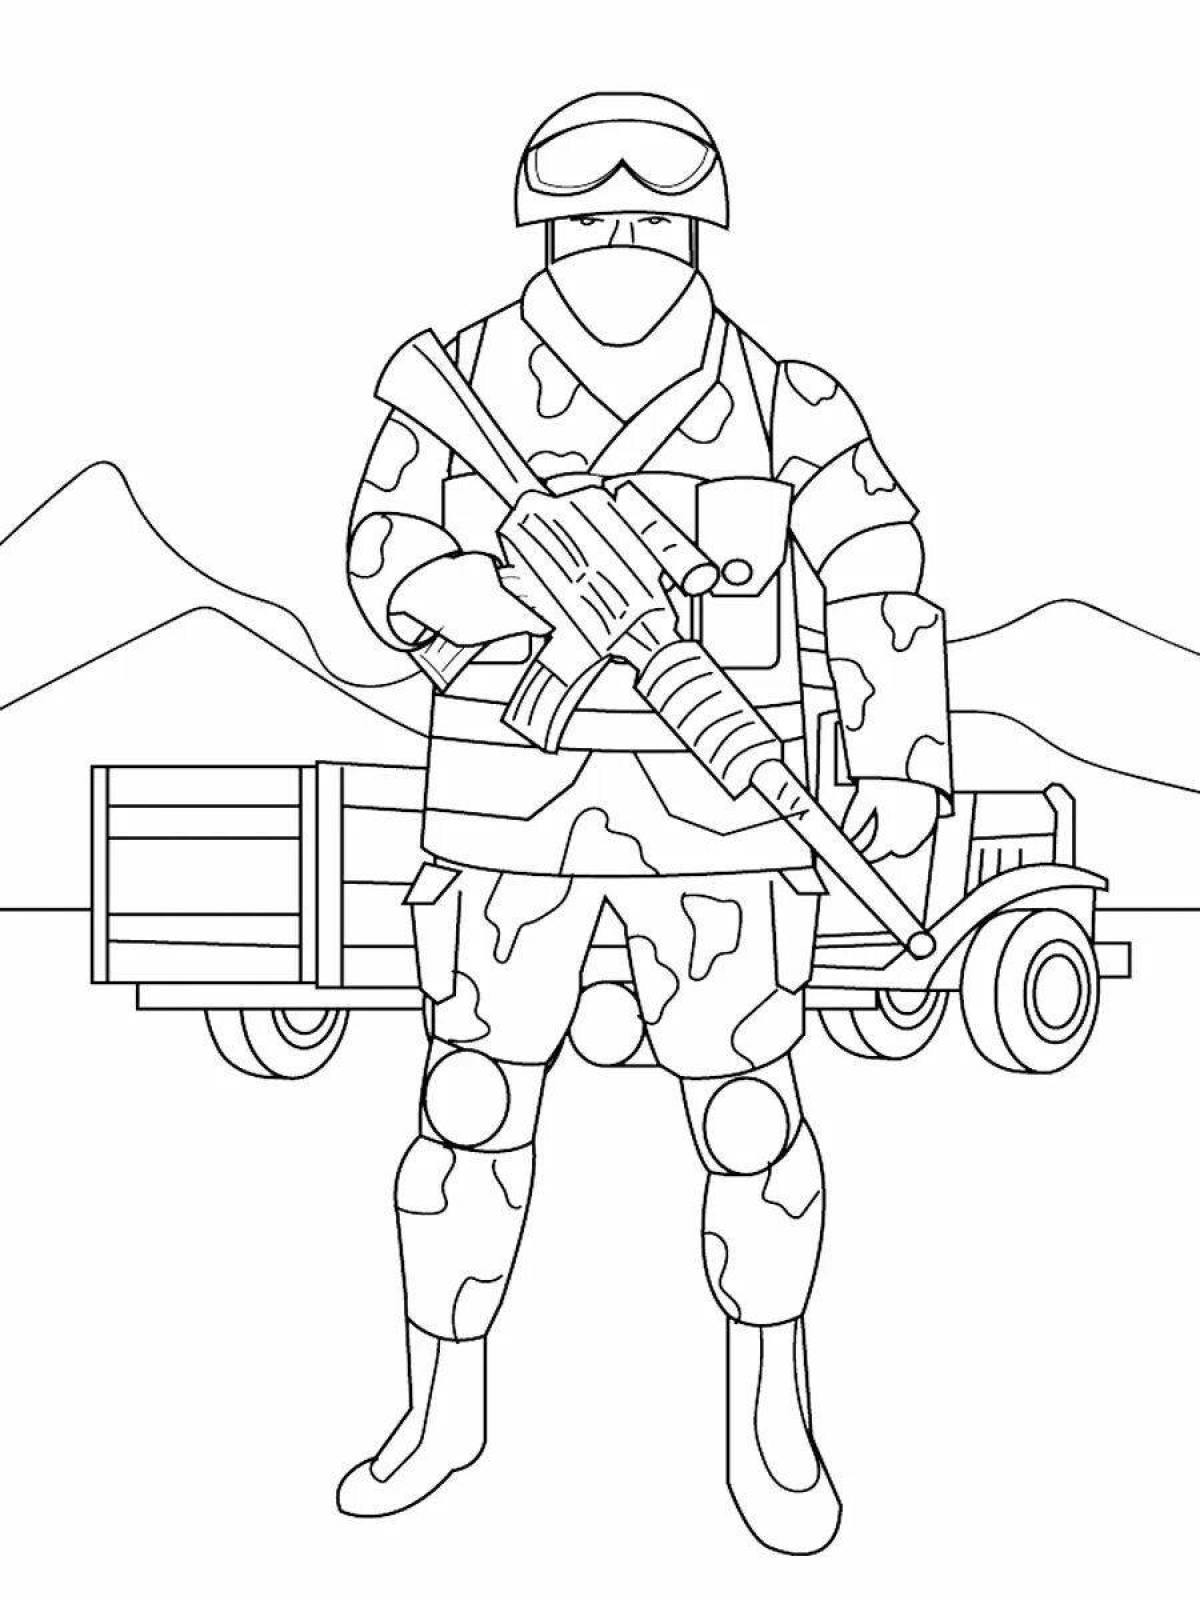 A fun military coloring book for kids